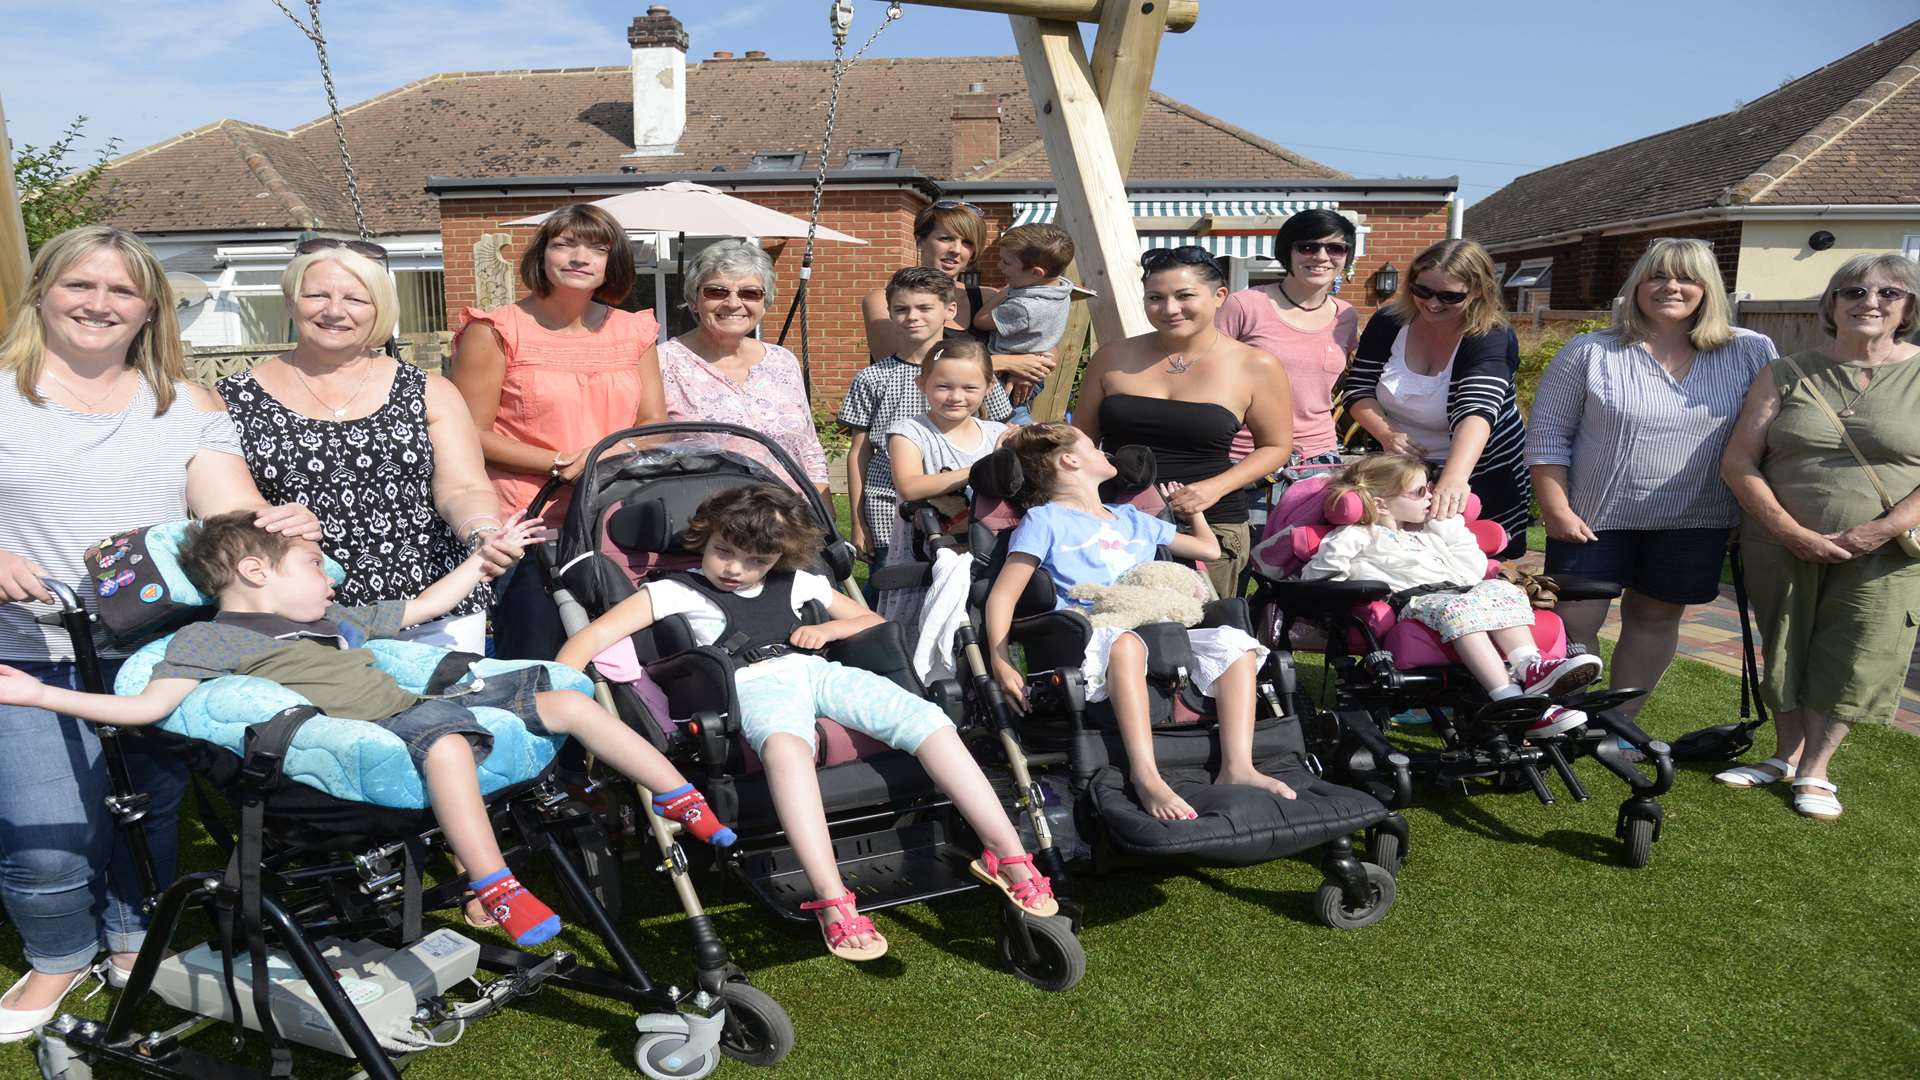 Debbie Chapman has set up a campaign group to get improved disabled facilities installed in her area